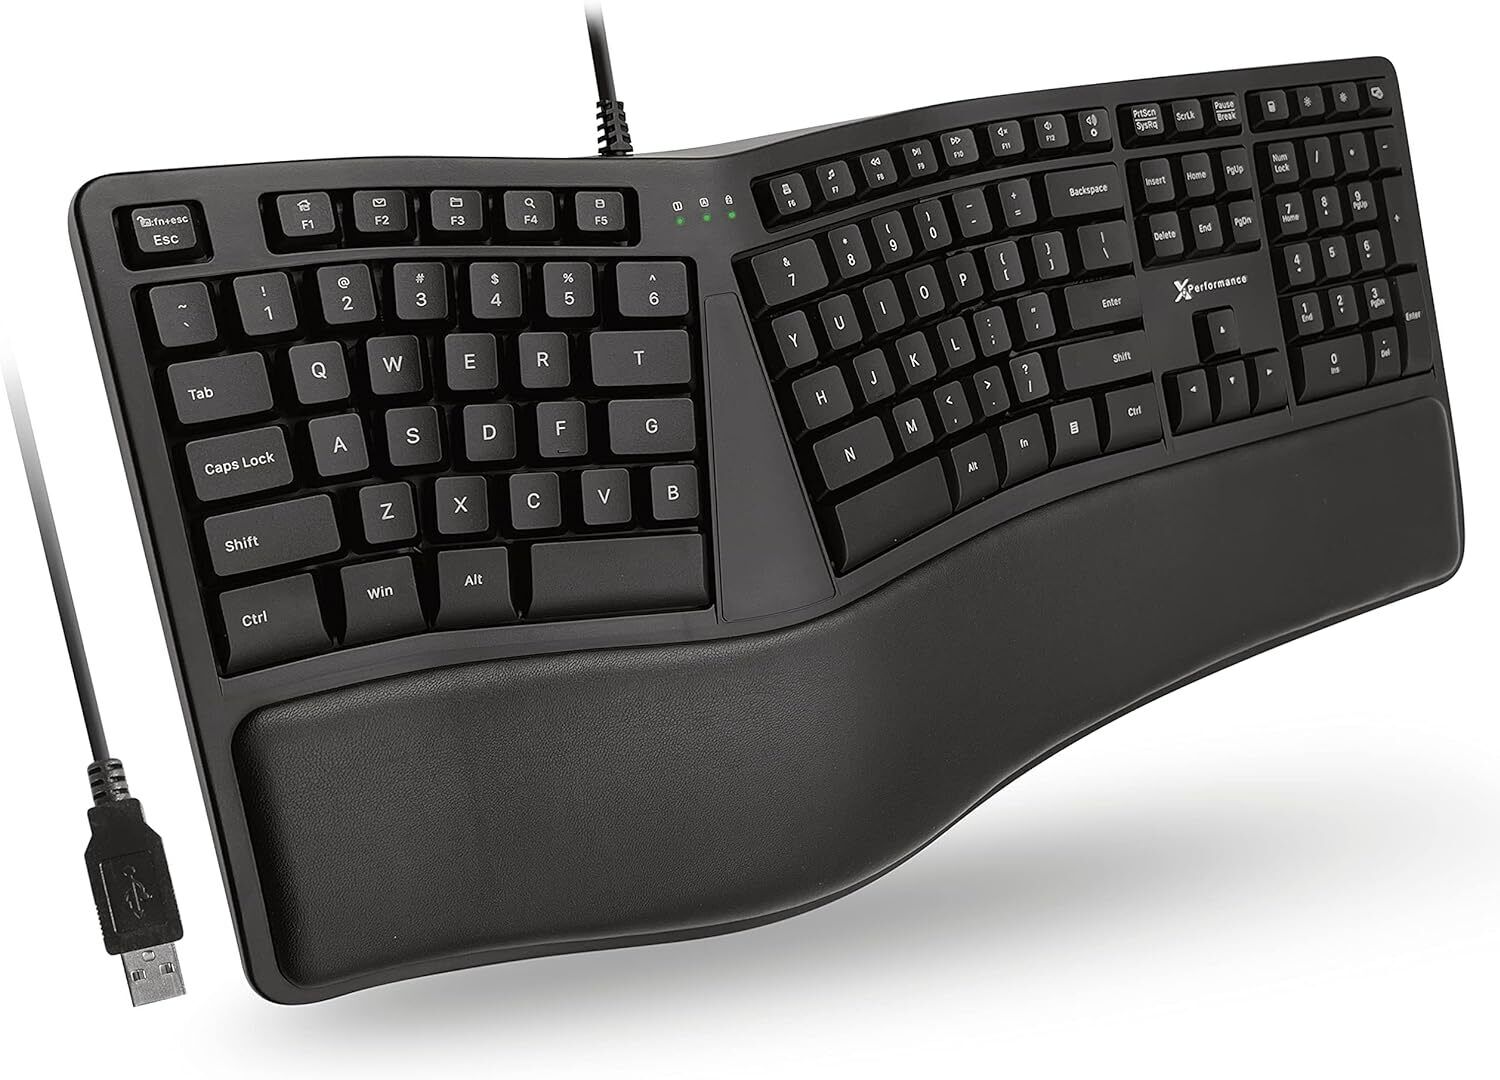 X9 Ergonomic Keyboard Wired with Cushioned Wrist Rest - Type Naturally Black 